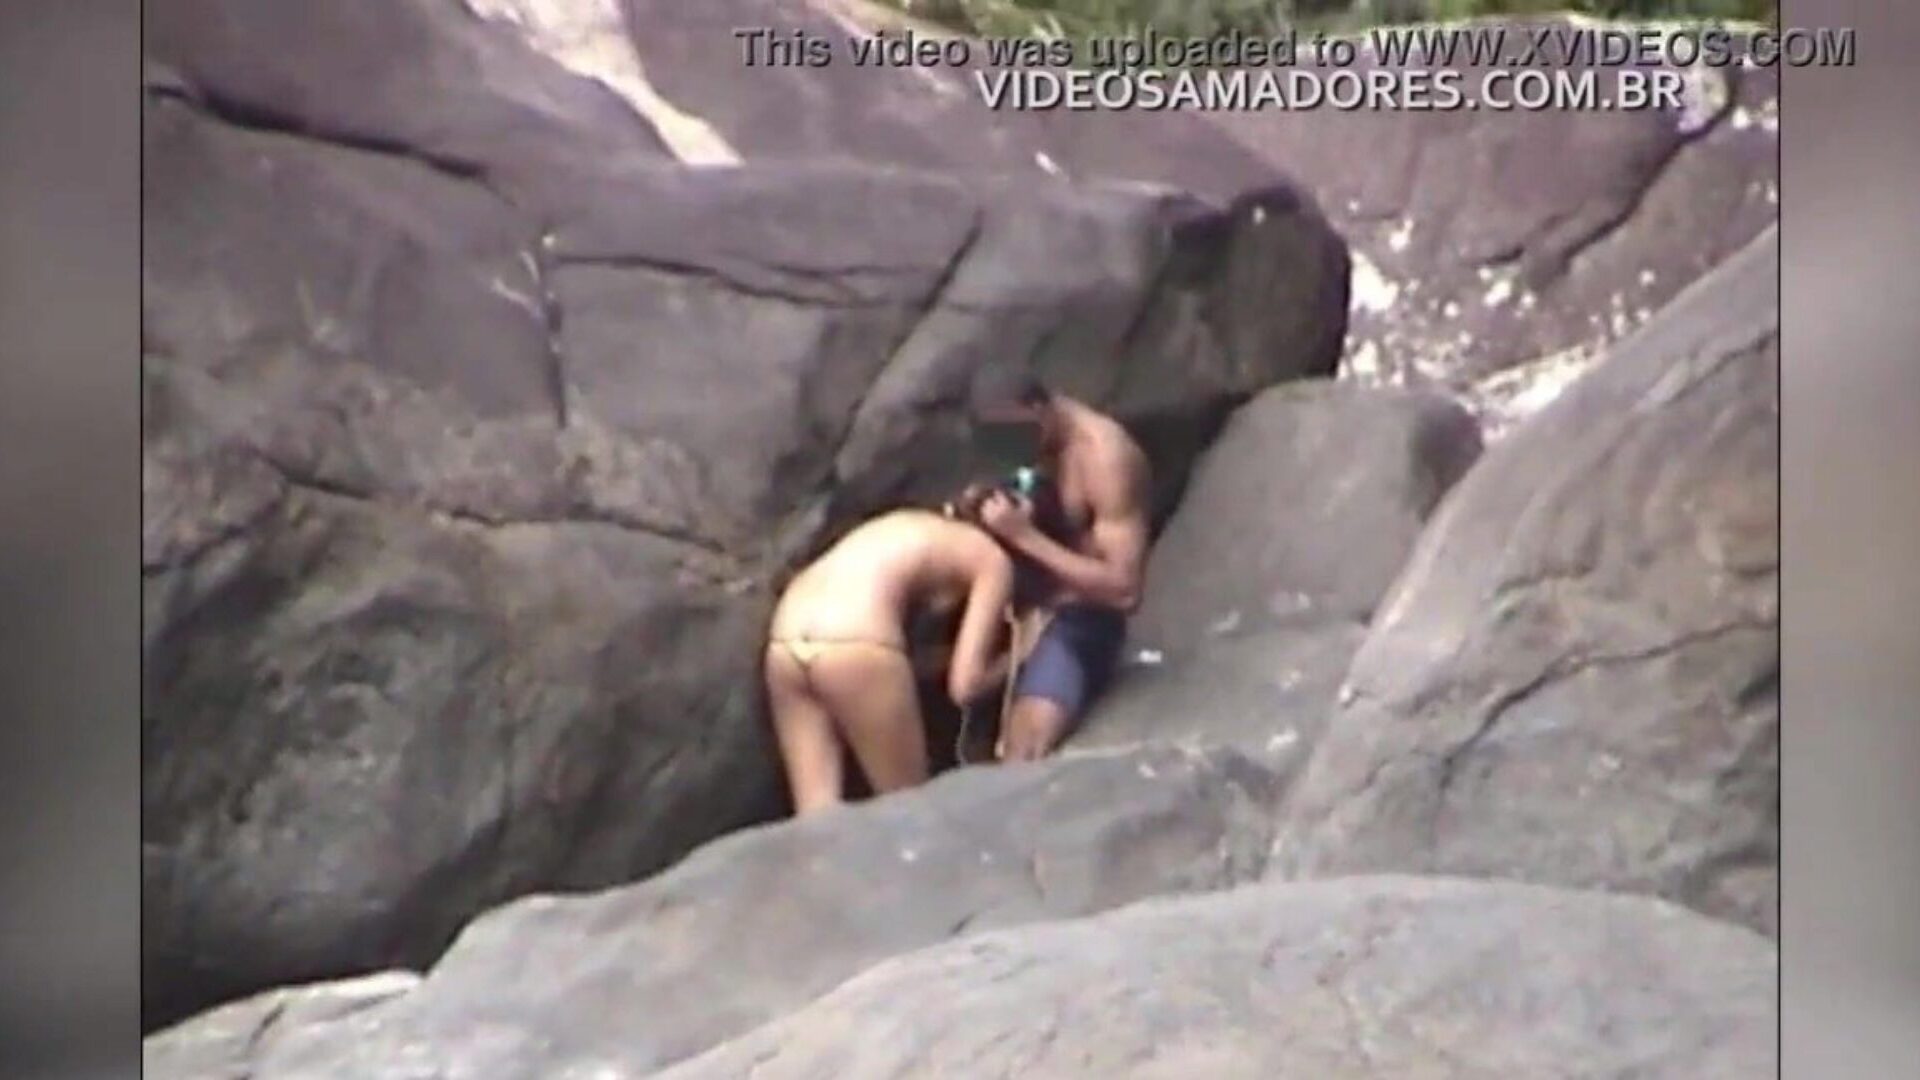 Couple has blowjob hook-up on the beach and is filmed out of realizing it